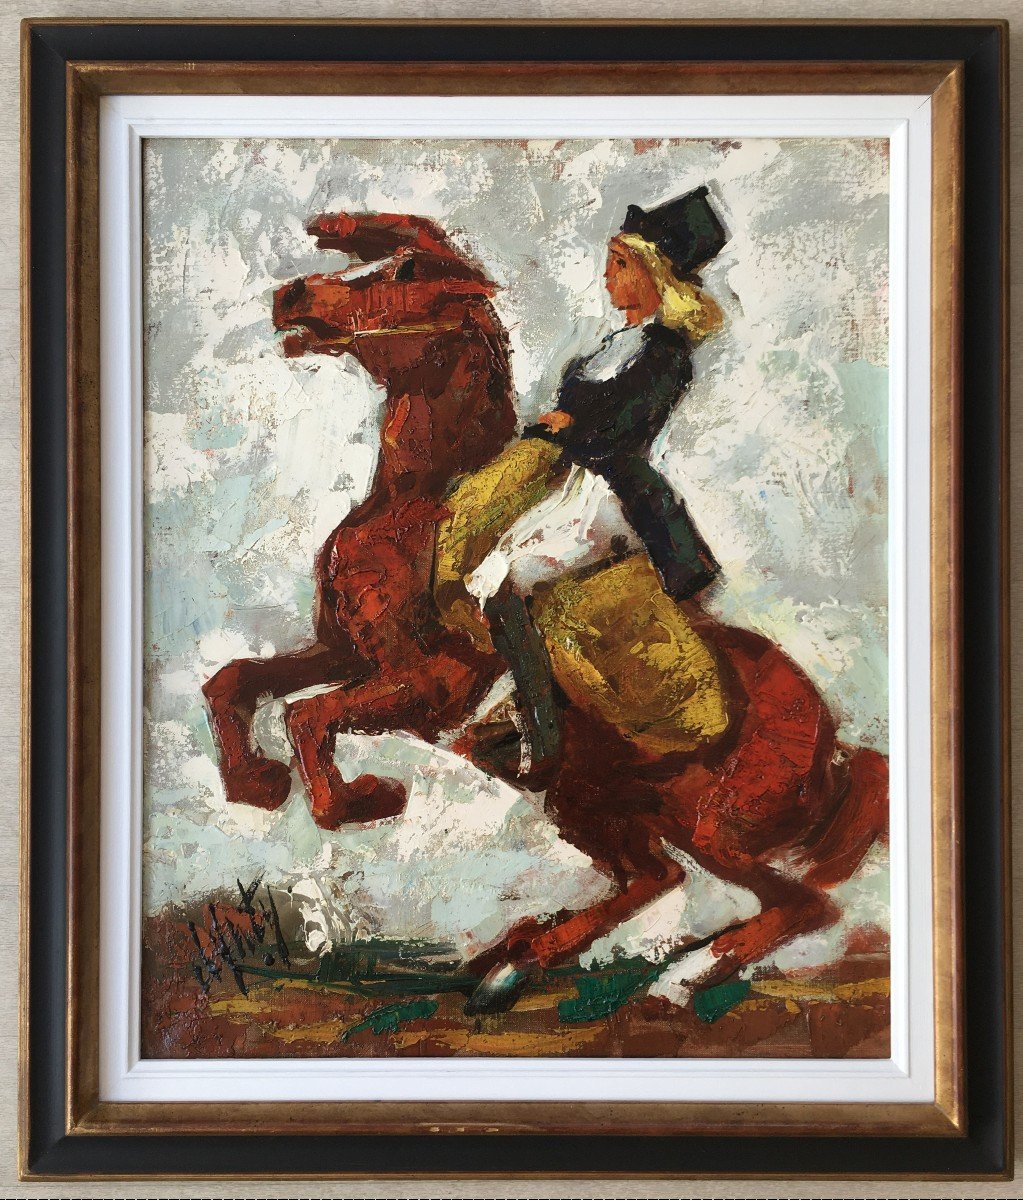 Superb Painting Henry d'Anty Rider Horse